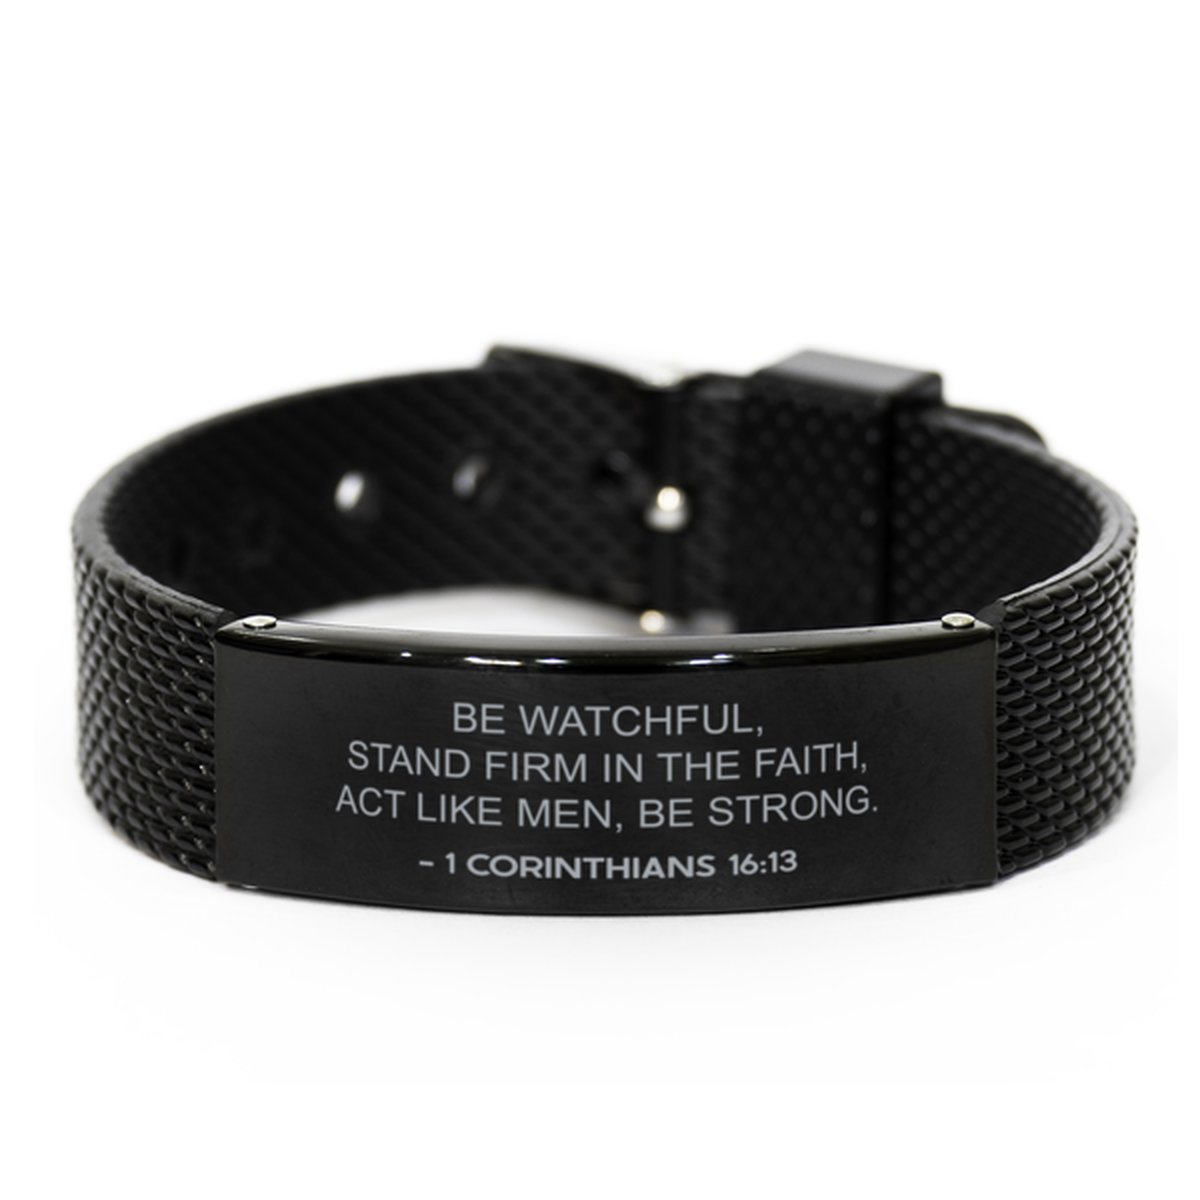 Christian Black Bracelet,, 1 Corinthians 16:13 Be Watchful, Stand Firm In The Faith, Act Like, Motivational Bible Verse Gifts For Men Women